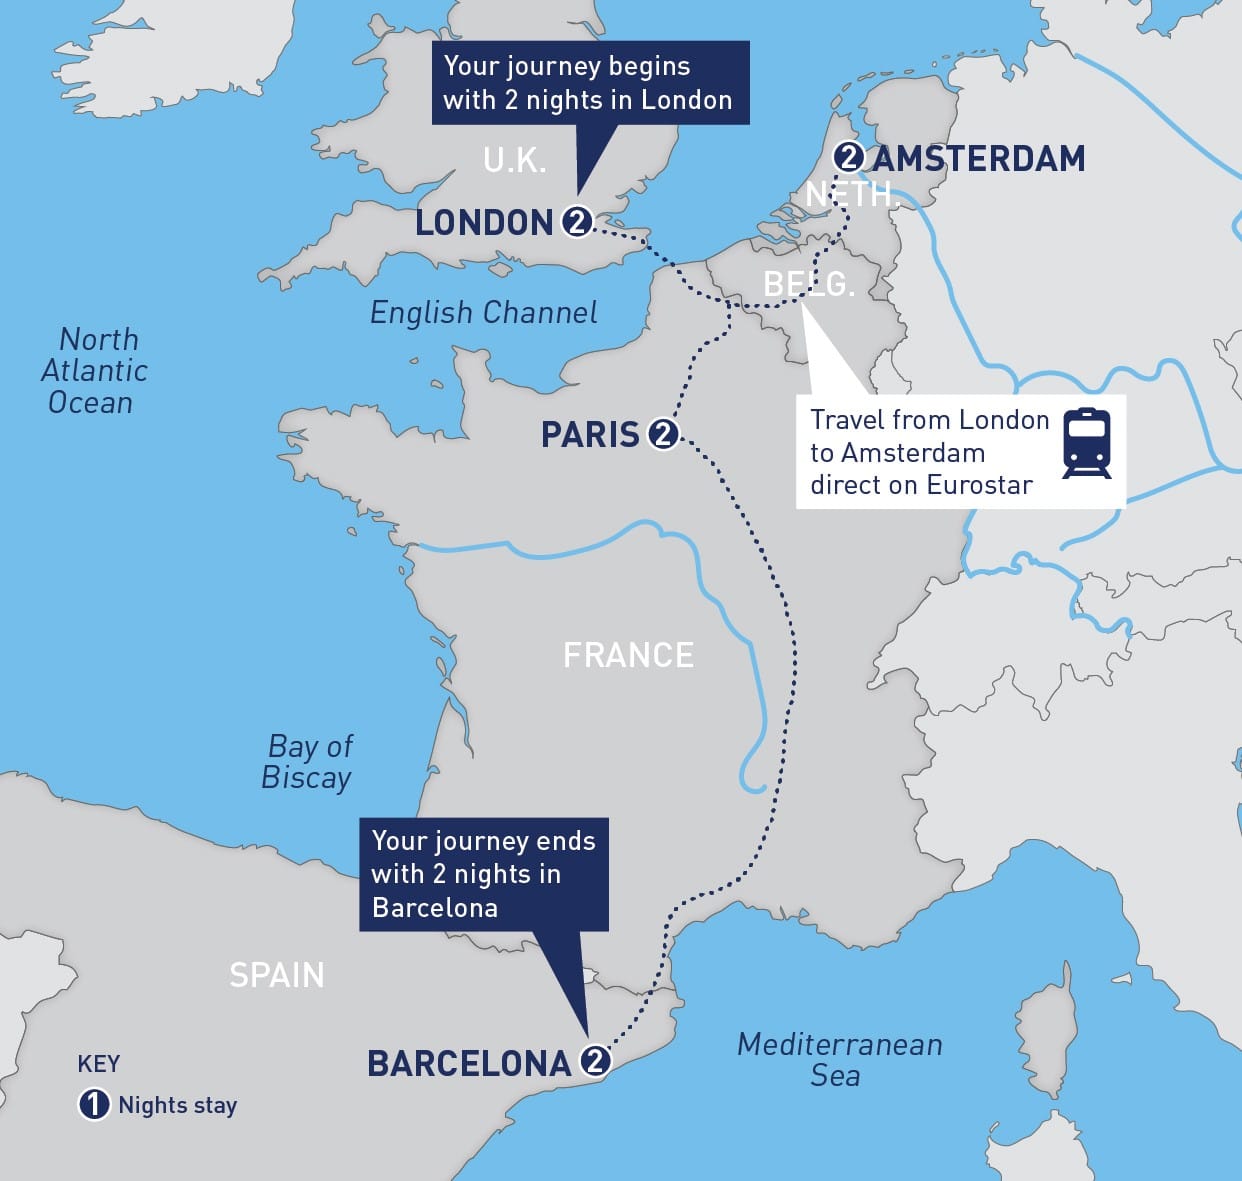 Itinerary mapped out from London to paris to amsterdam to Barcelona